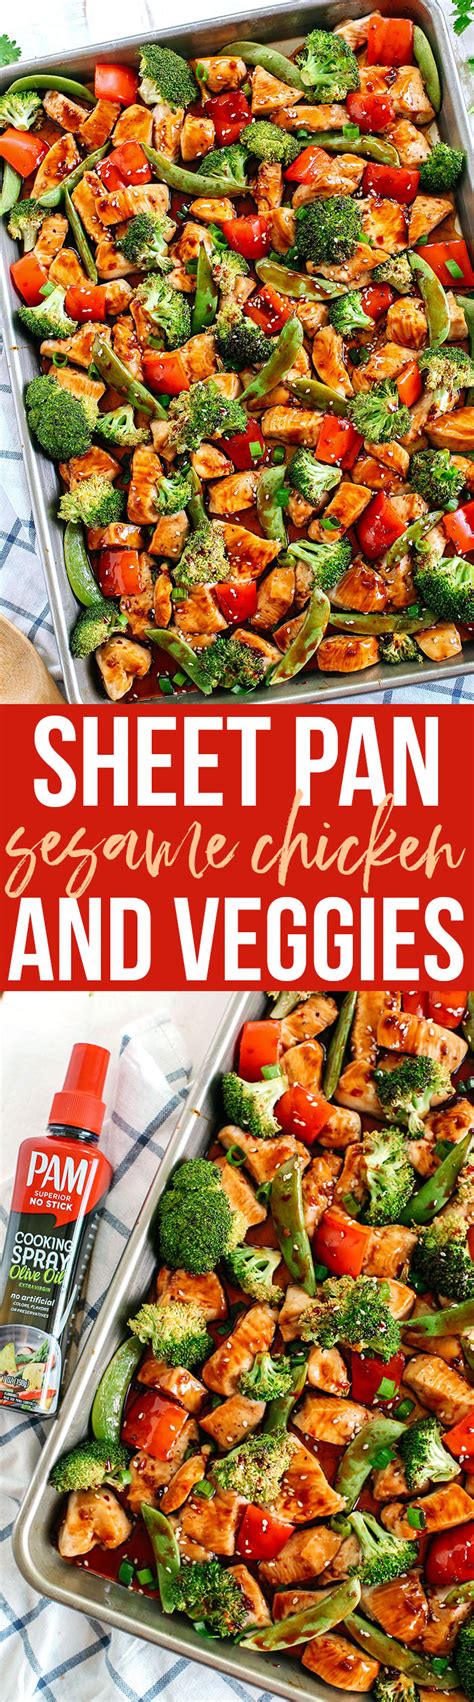 This sheet pan sesame chicken and veggies makes the perfect weeknight dinner that's healthy, delicious and easily made all on one pan in under 30 minutes! Sheet Pan Sesame Chicken and Veggies | Recipe | Healthy ...